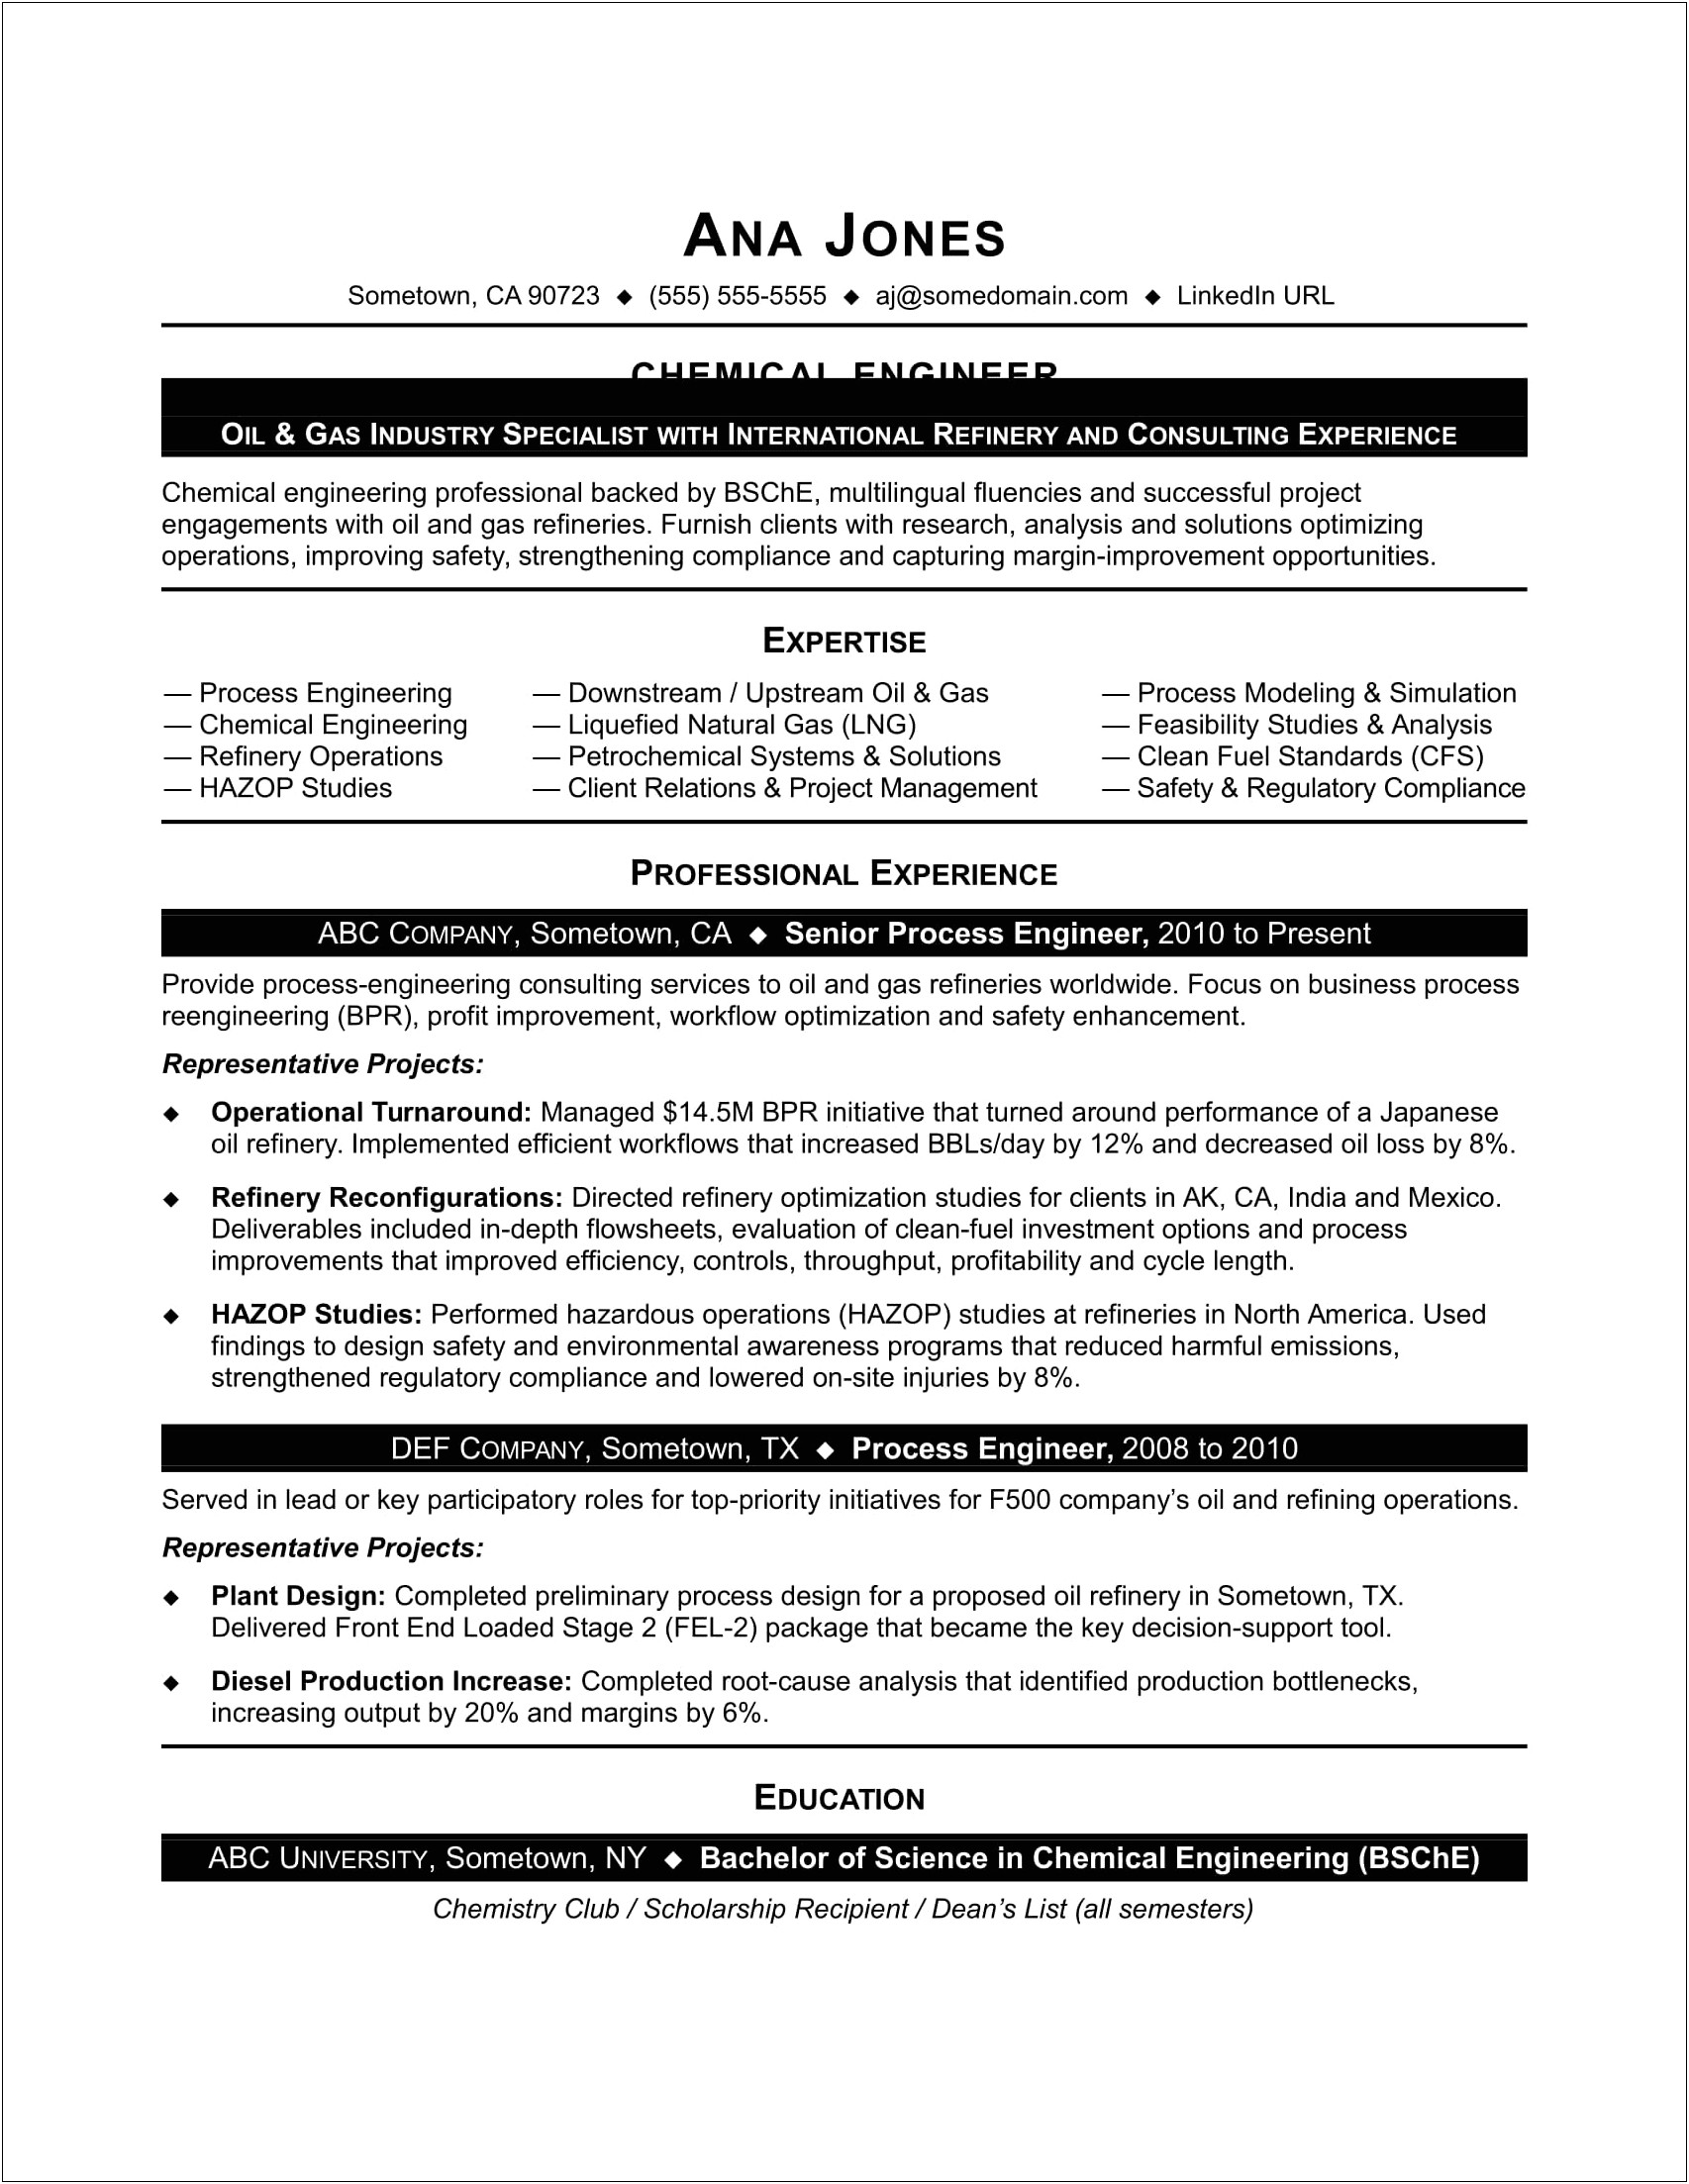 Efficient Research As Skill On Resume